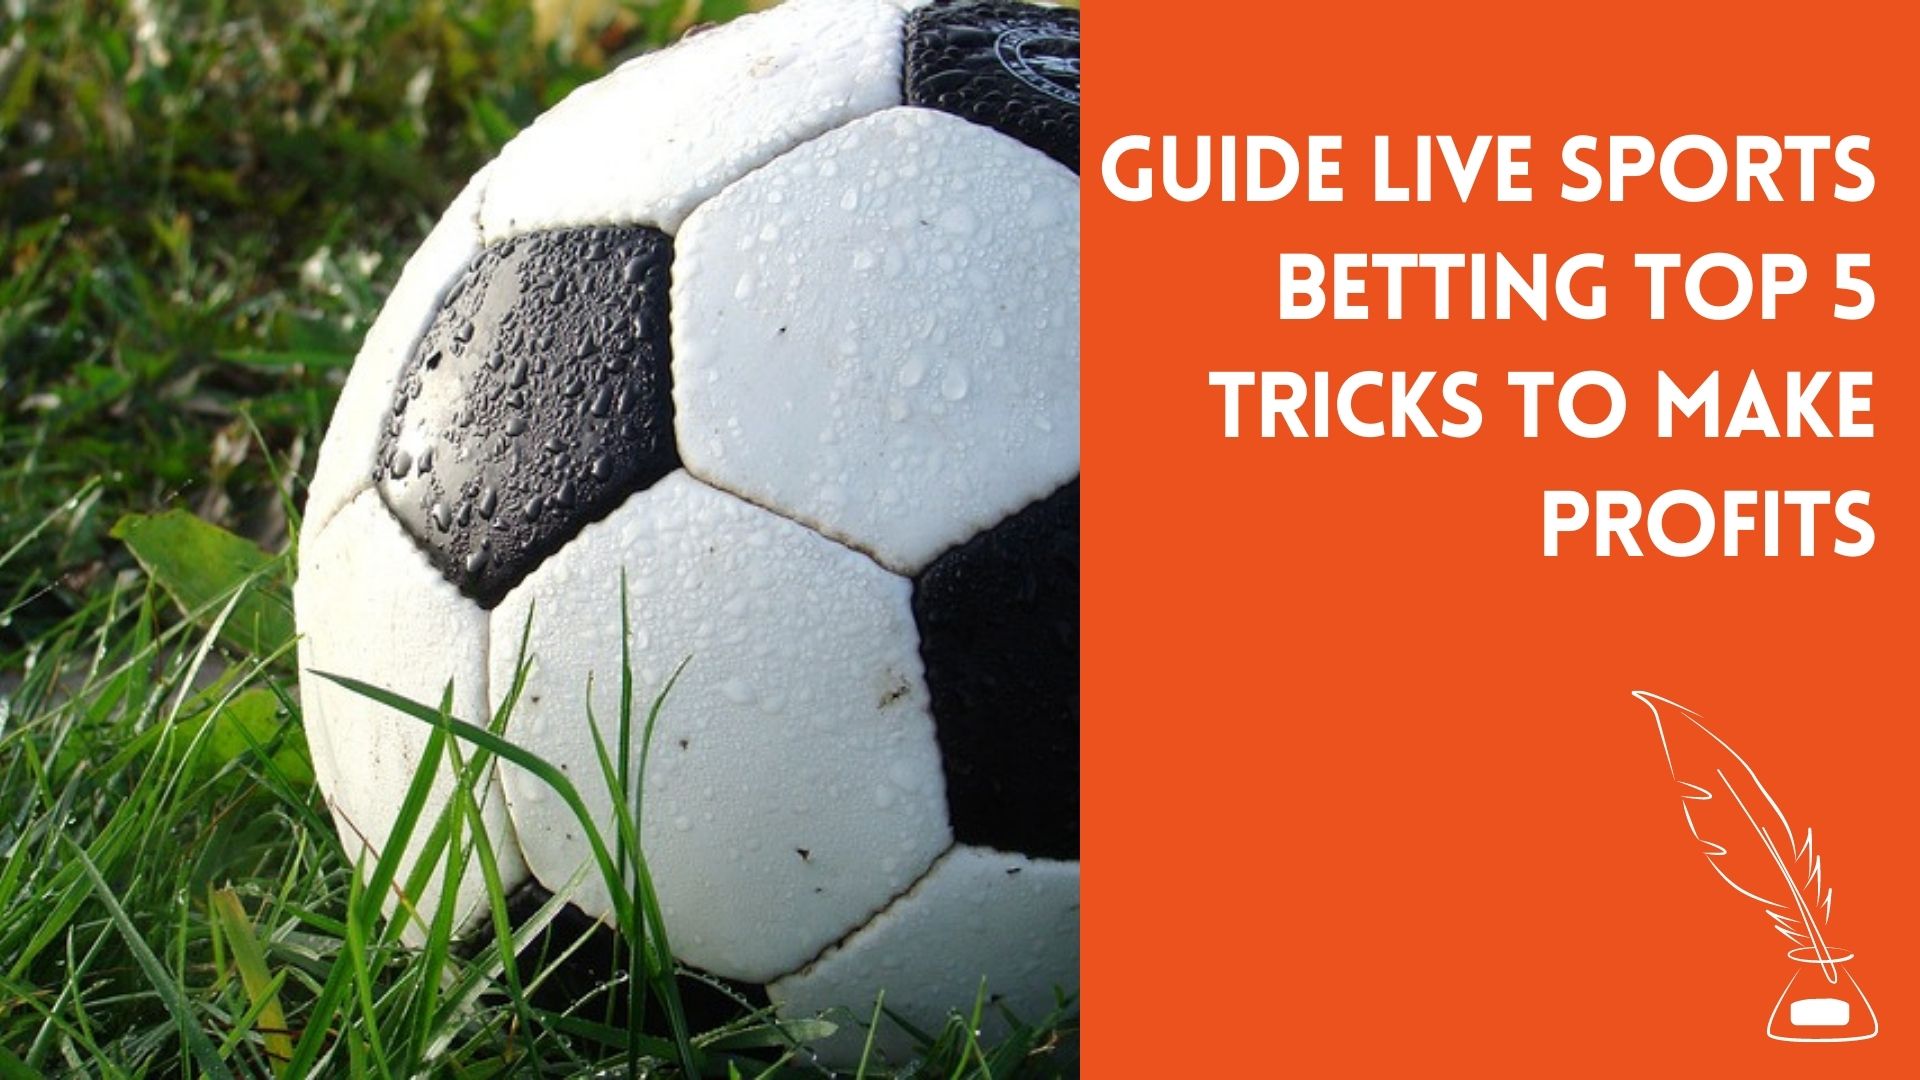 Guide Live Sports Betting Top 5 tricks to make profits